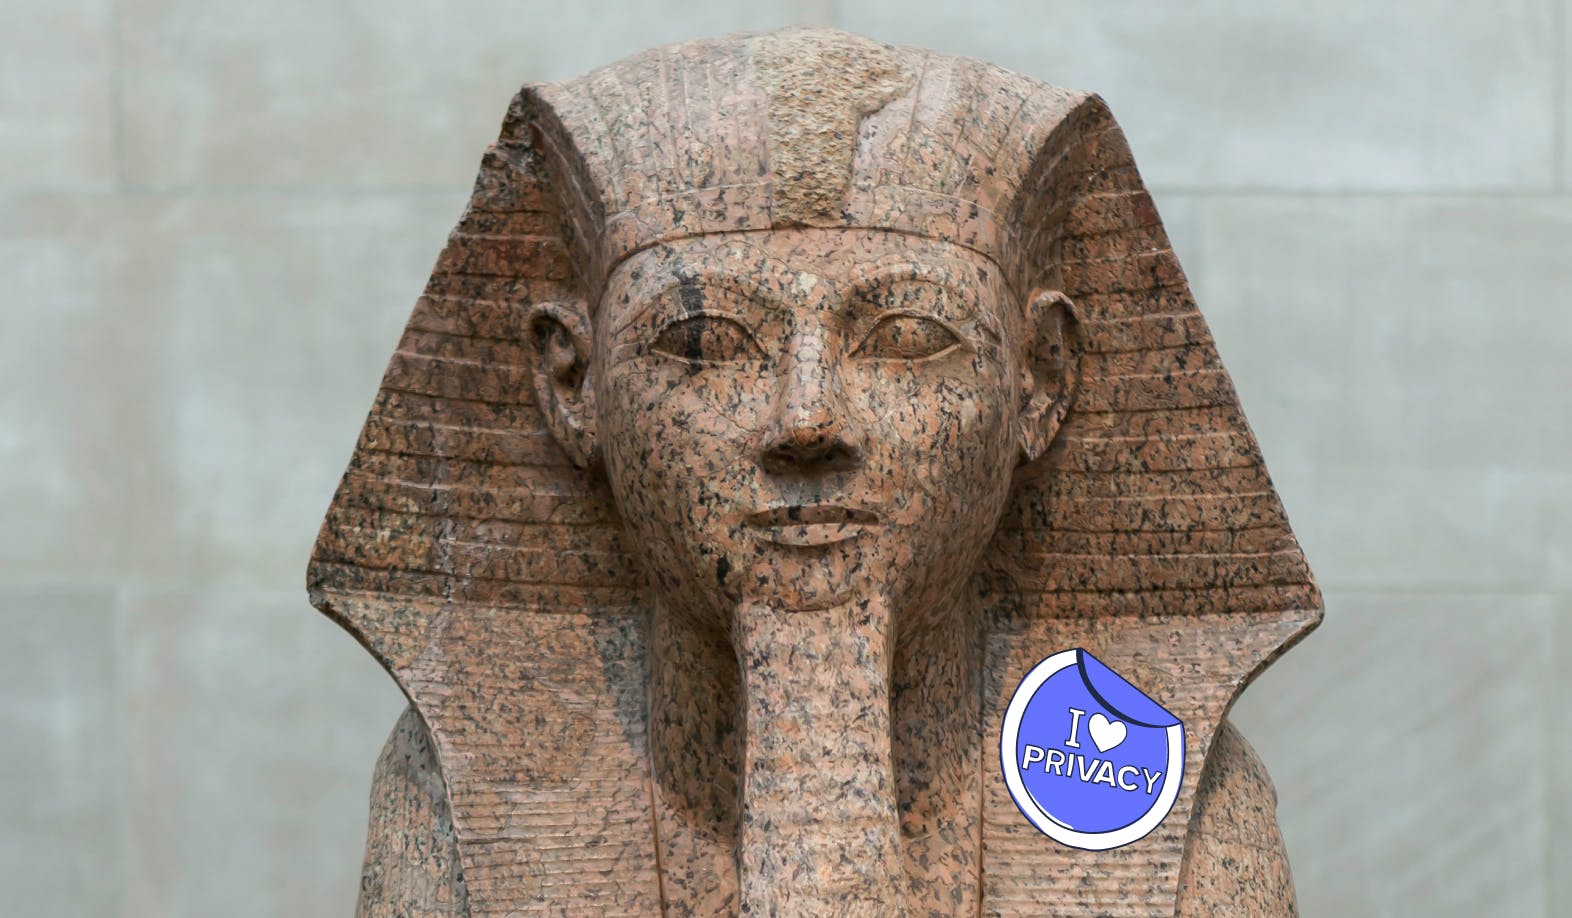 blogpost-image of the Egyptian statue of the great Sphinx of Giza with an 'I love privacy' sticker